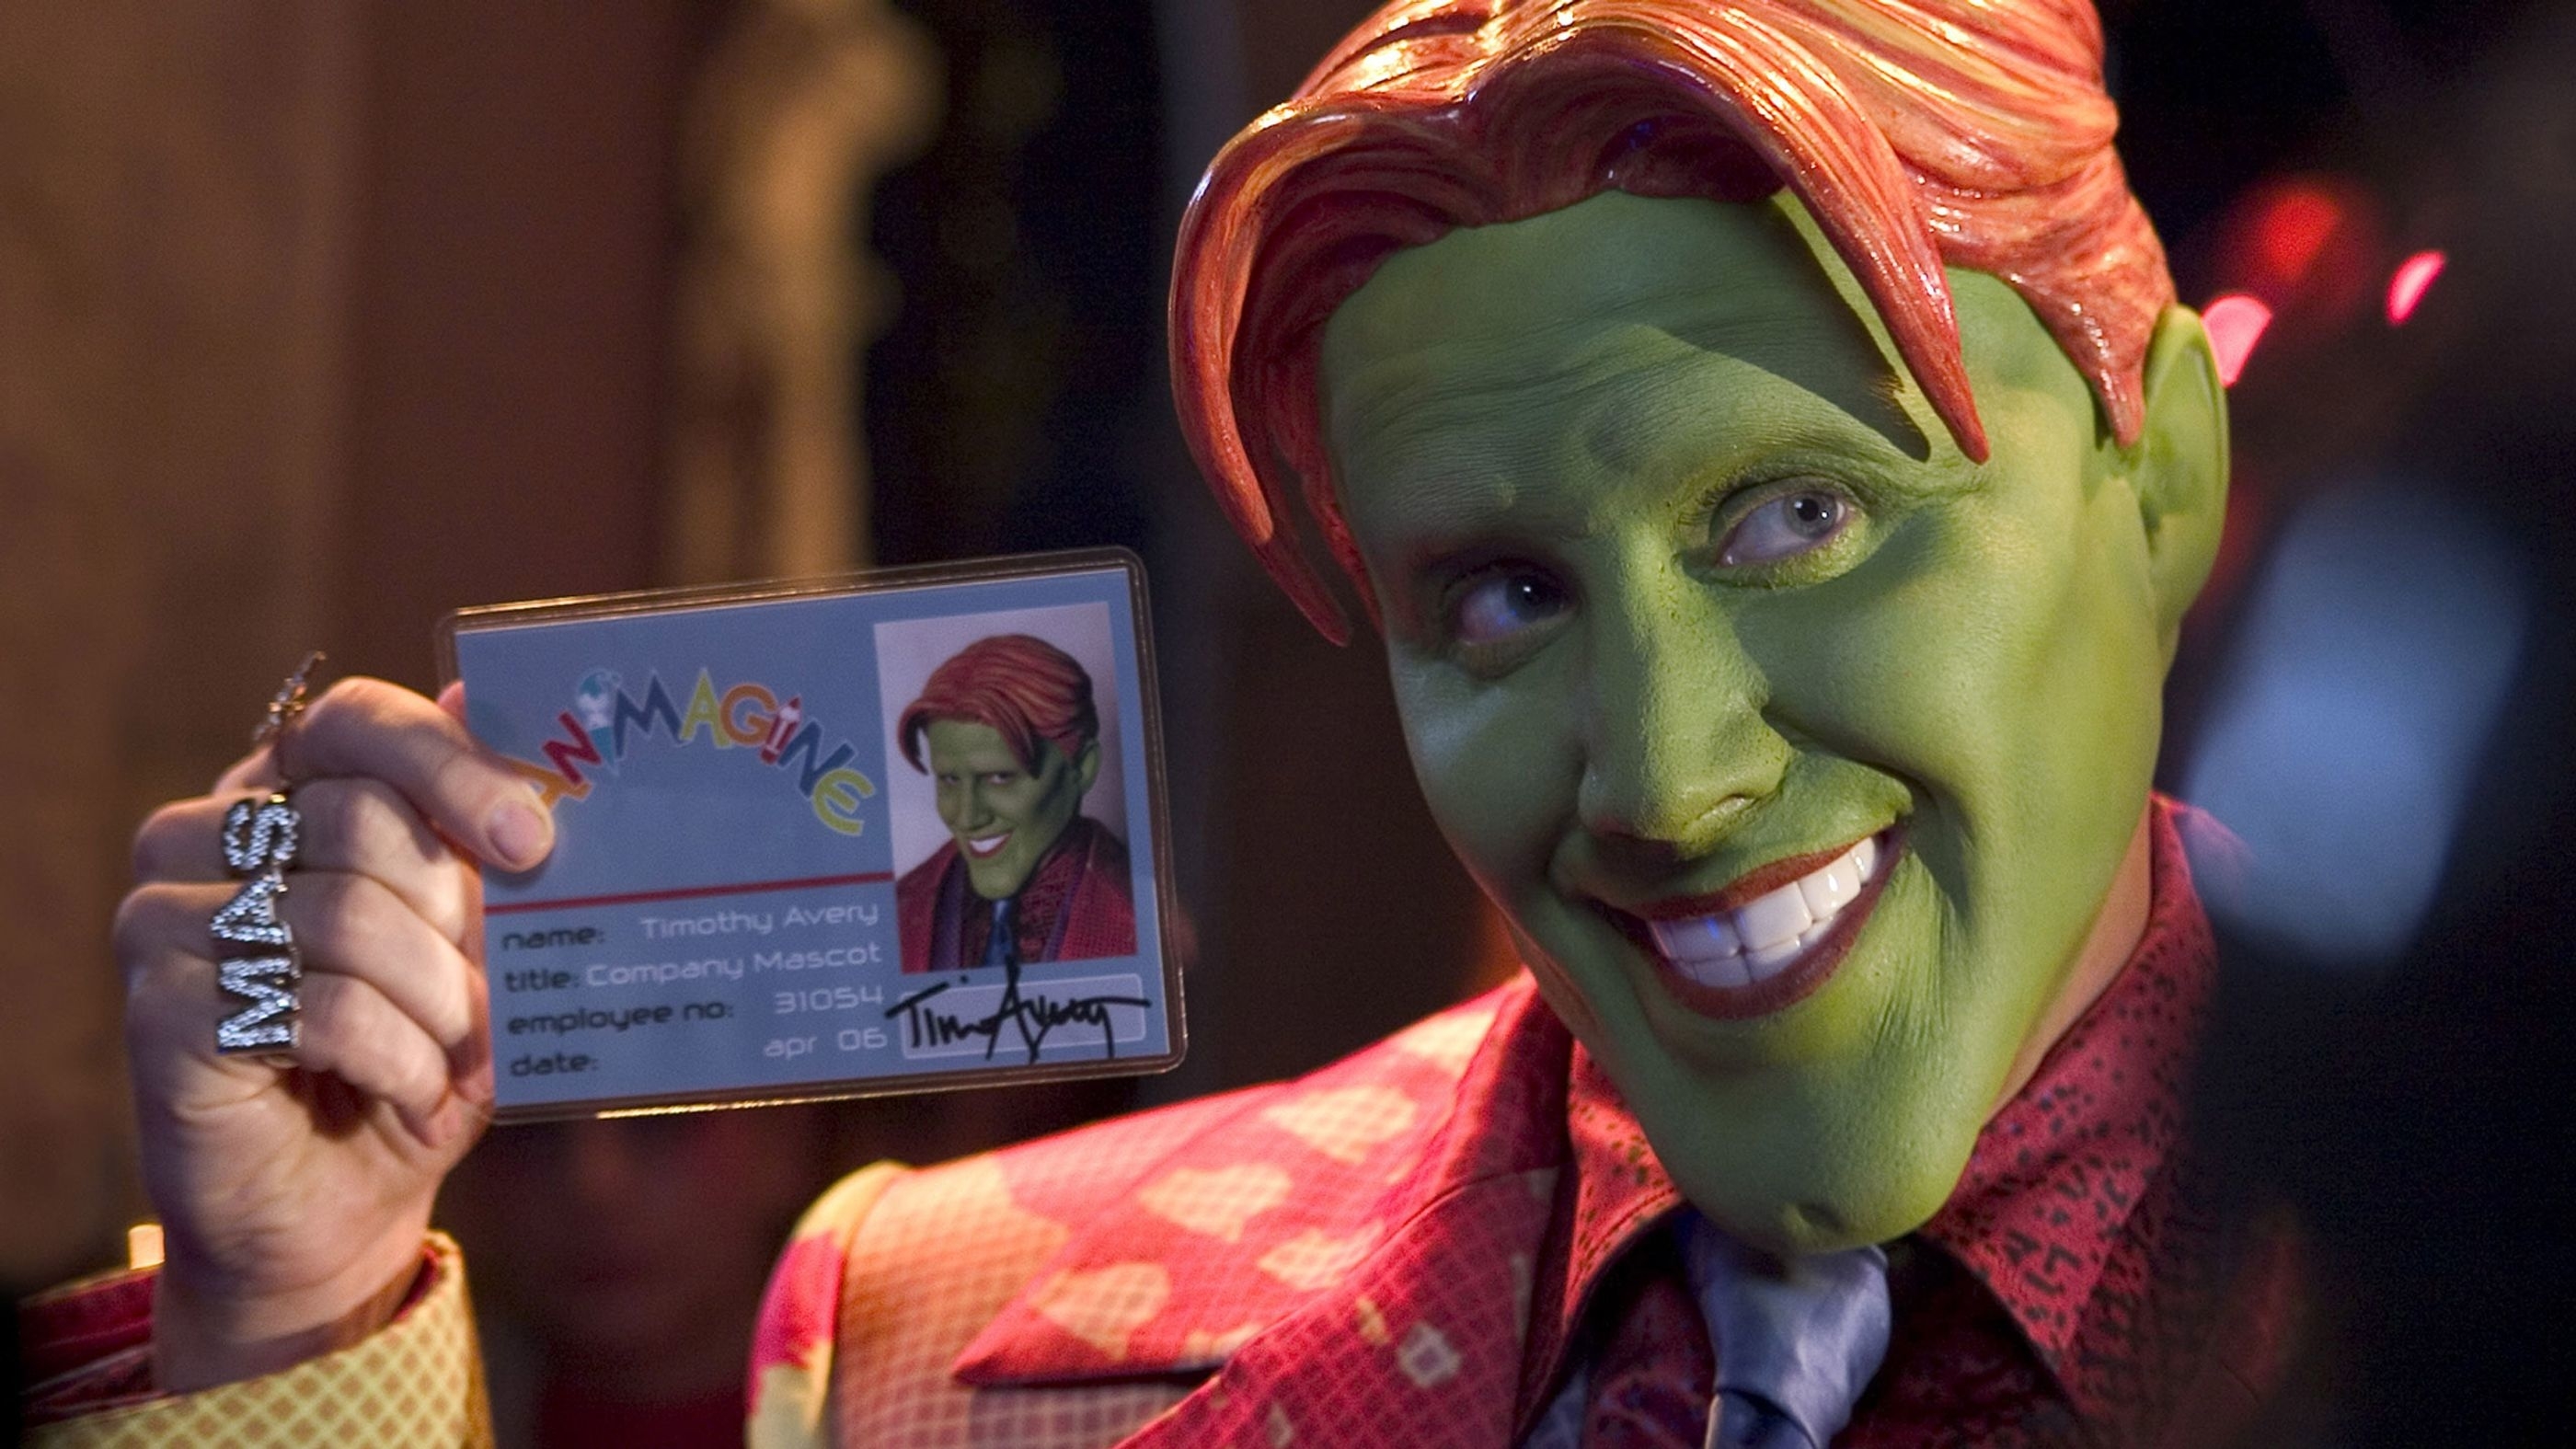 The Mask character, portrayed by Jim Carrey, holding up a humorous ID card